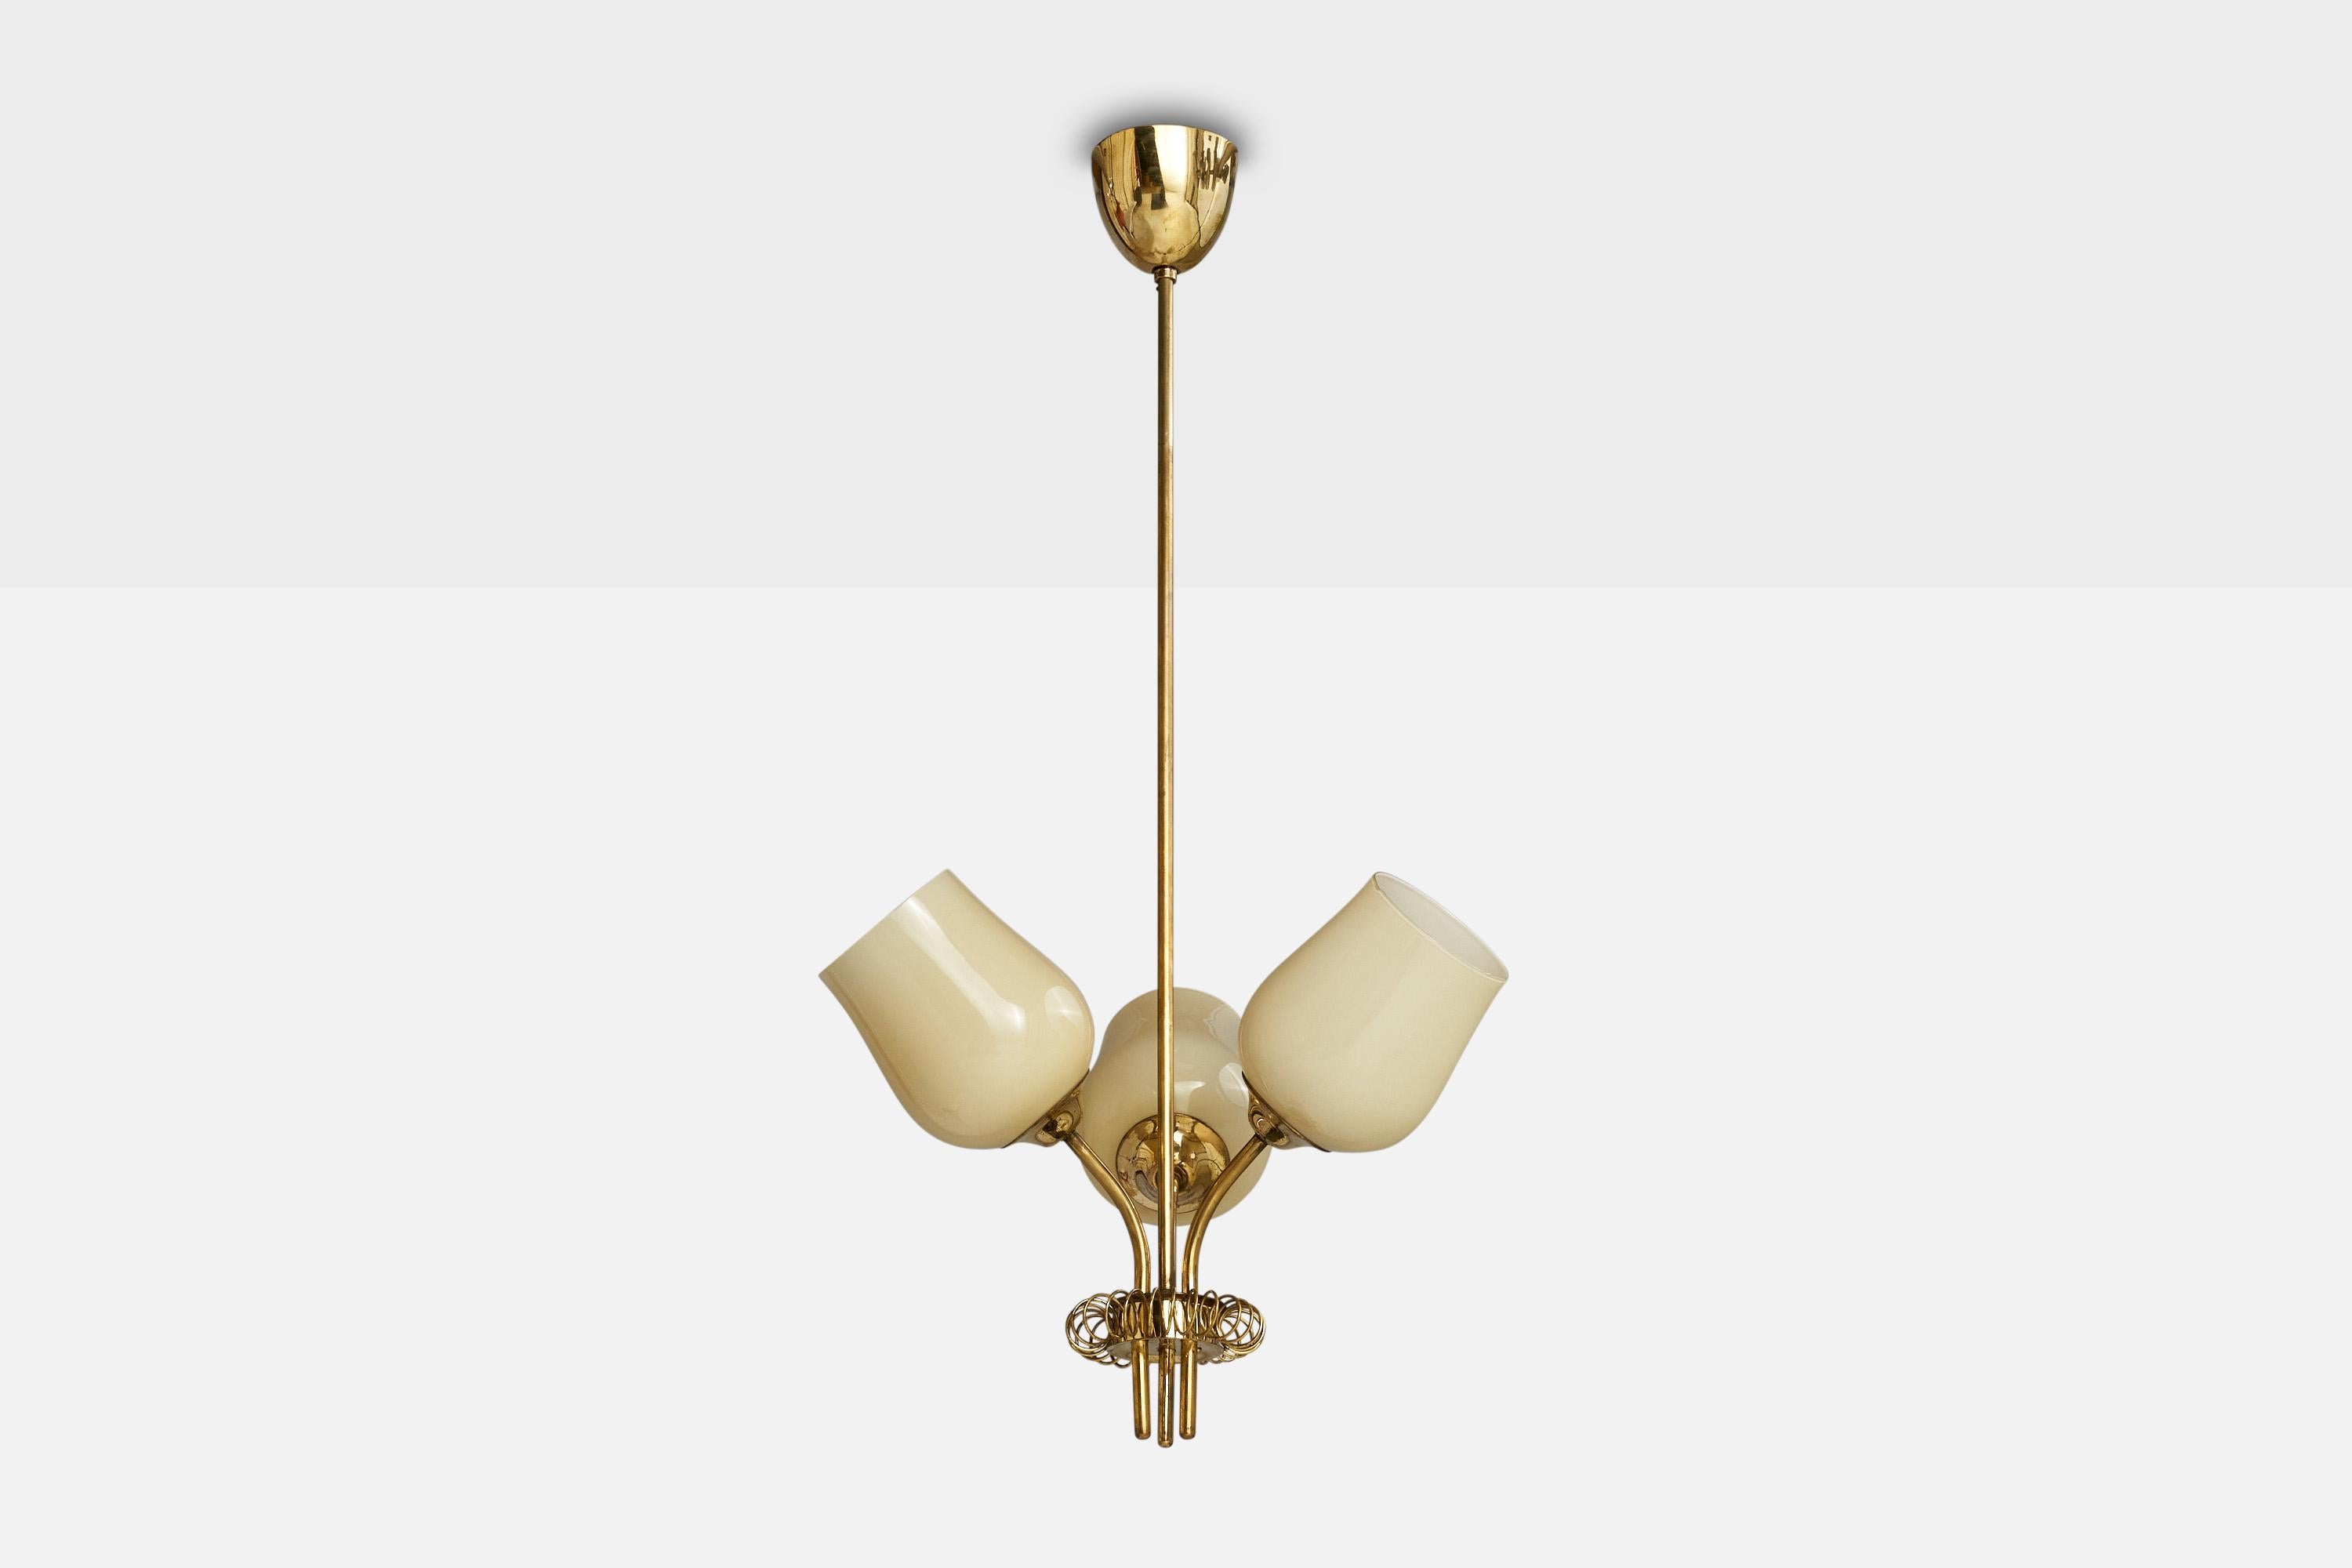 A brass and beige opaline glass chandelier designed and produced by Itsu, Finland, 1940s.

Dimensions of canopy (inches): 3.25” H x 3.75”  Diameter
Socket takes standard E-26 bulbs. 3 sockets.There is no maximum wattage stated on the fixture. All